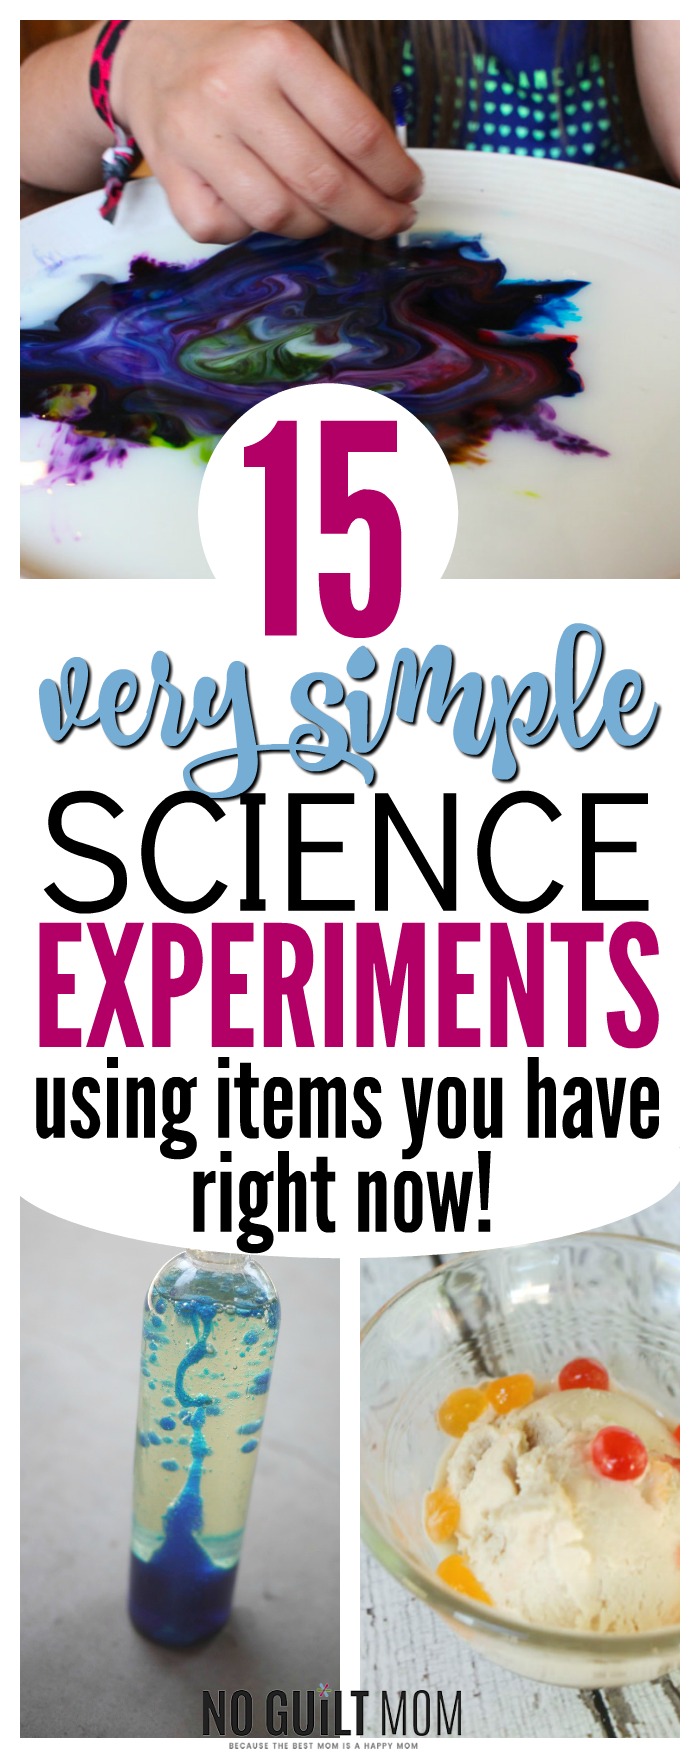 I've been looking all over for easy and unique science experiments for kids that use things I already have! These projects are super cool and I already own the household items of baking soda, food coloring and vinegar. I'm saving these indoor activities for a rainy day or maybe when my children are on summer break.